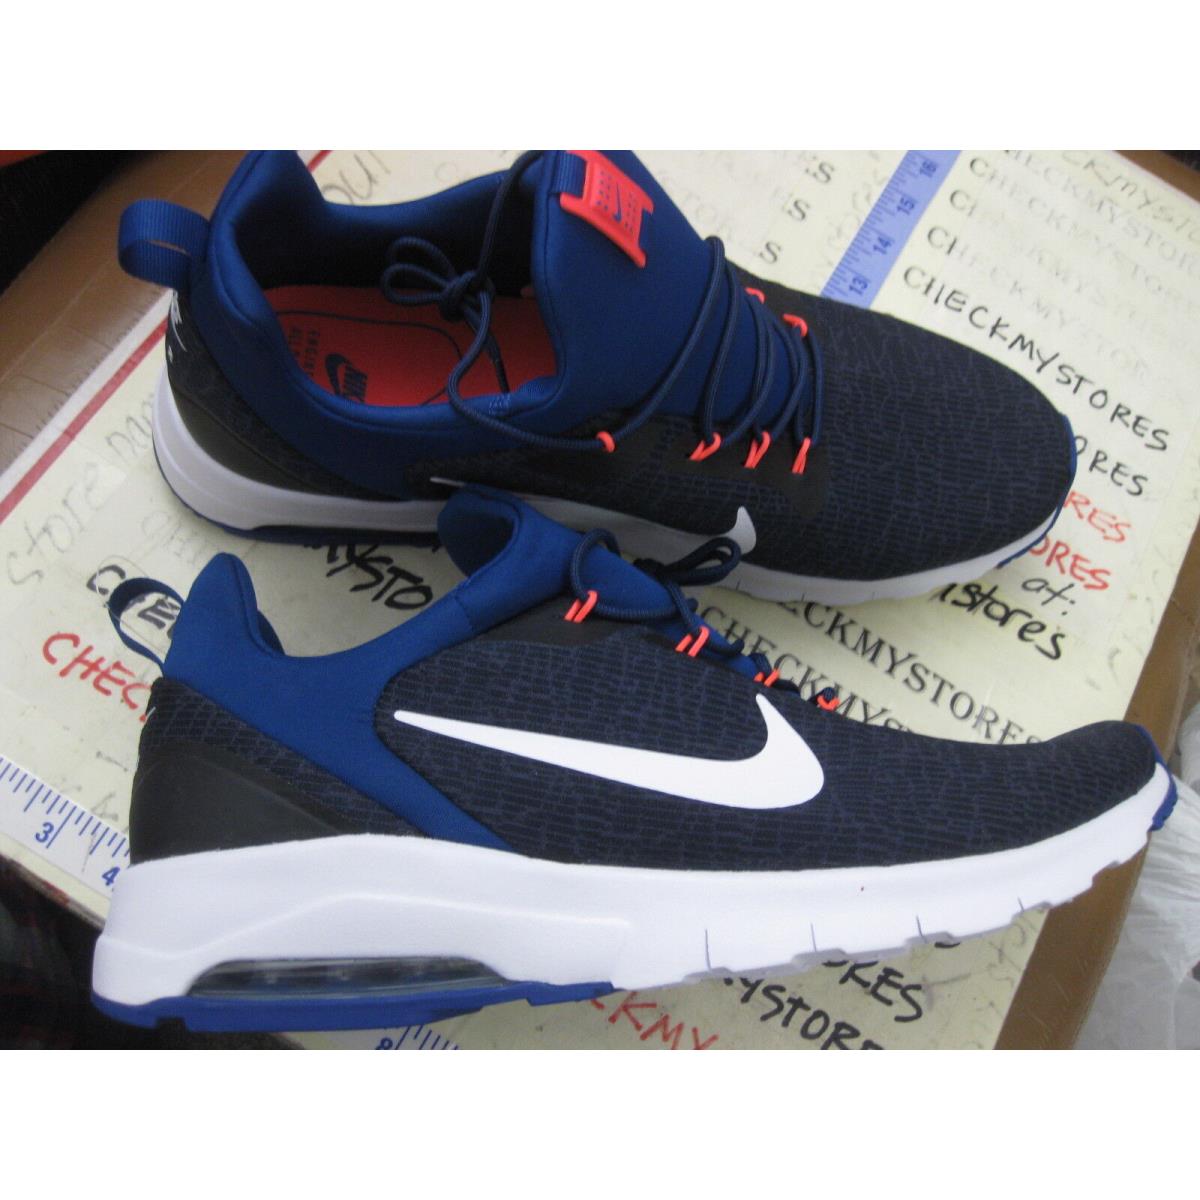 Nike Air Max Racer Mens Running Shoes 916771 402 Mens Size | 091205640641 - shoes - OBSIDIAN GYM BLUUE WHITE THUNDER BLUE | SporTipTop